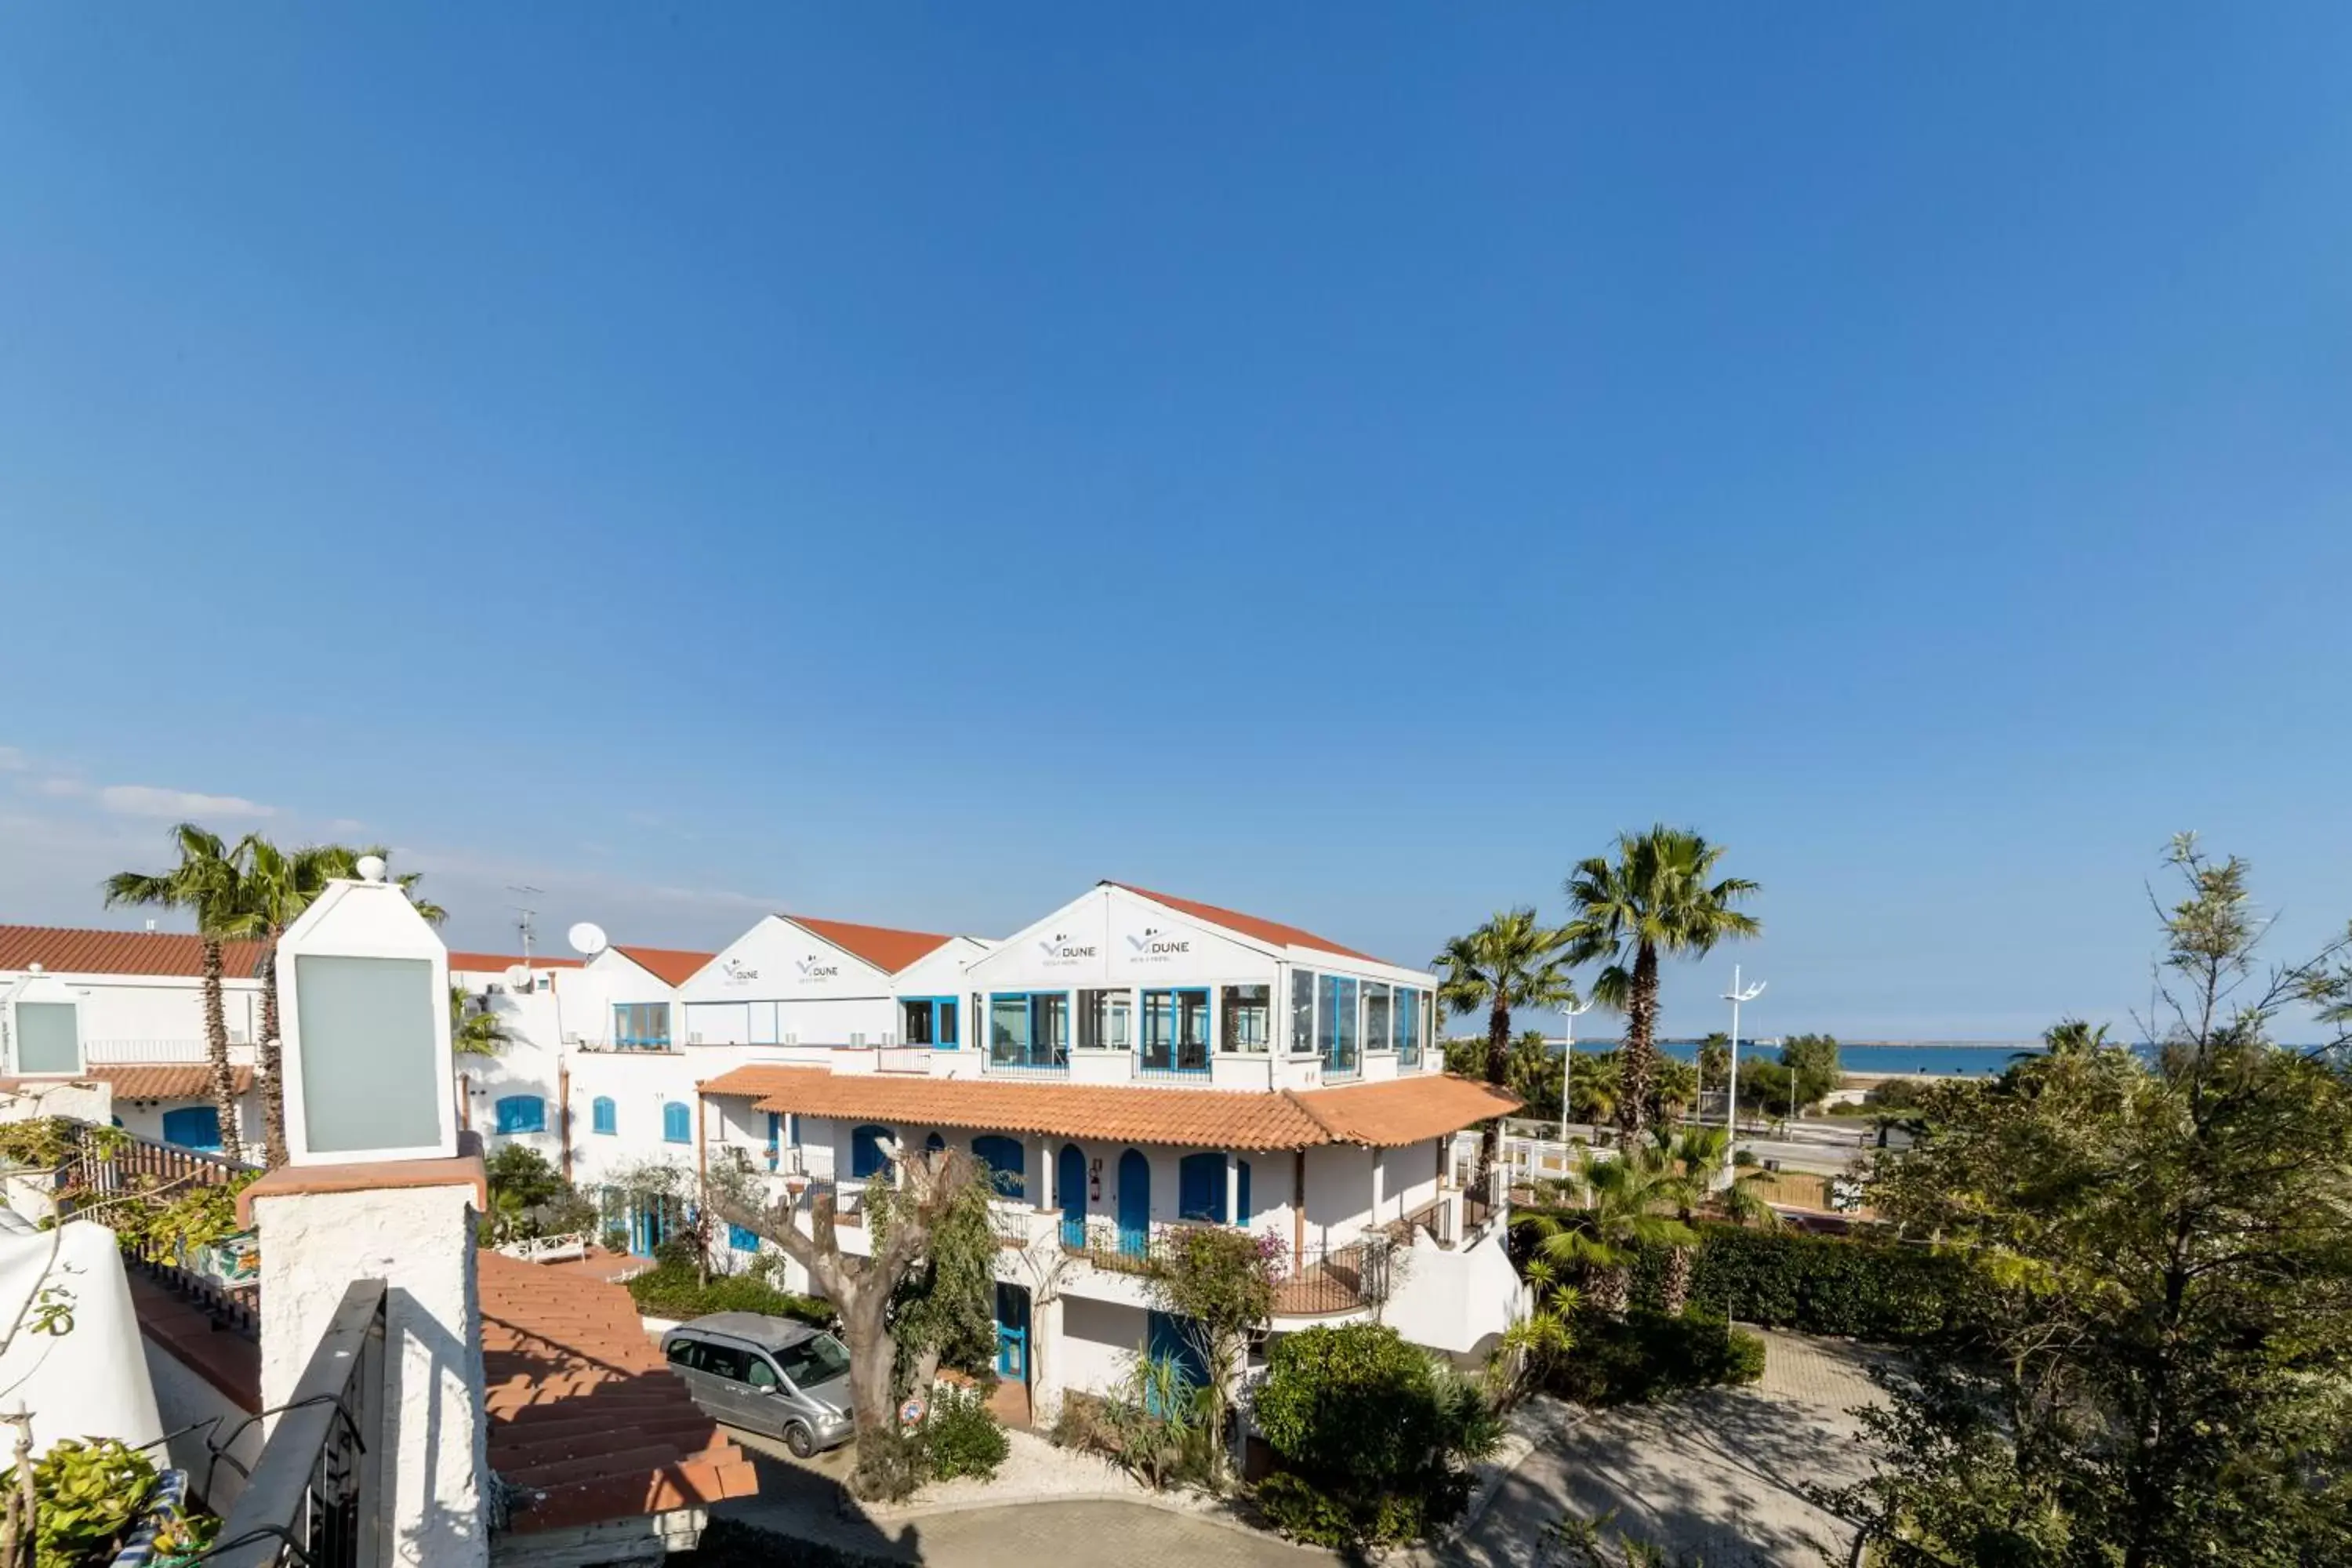 Property building in Le Dune Sicily Hotel